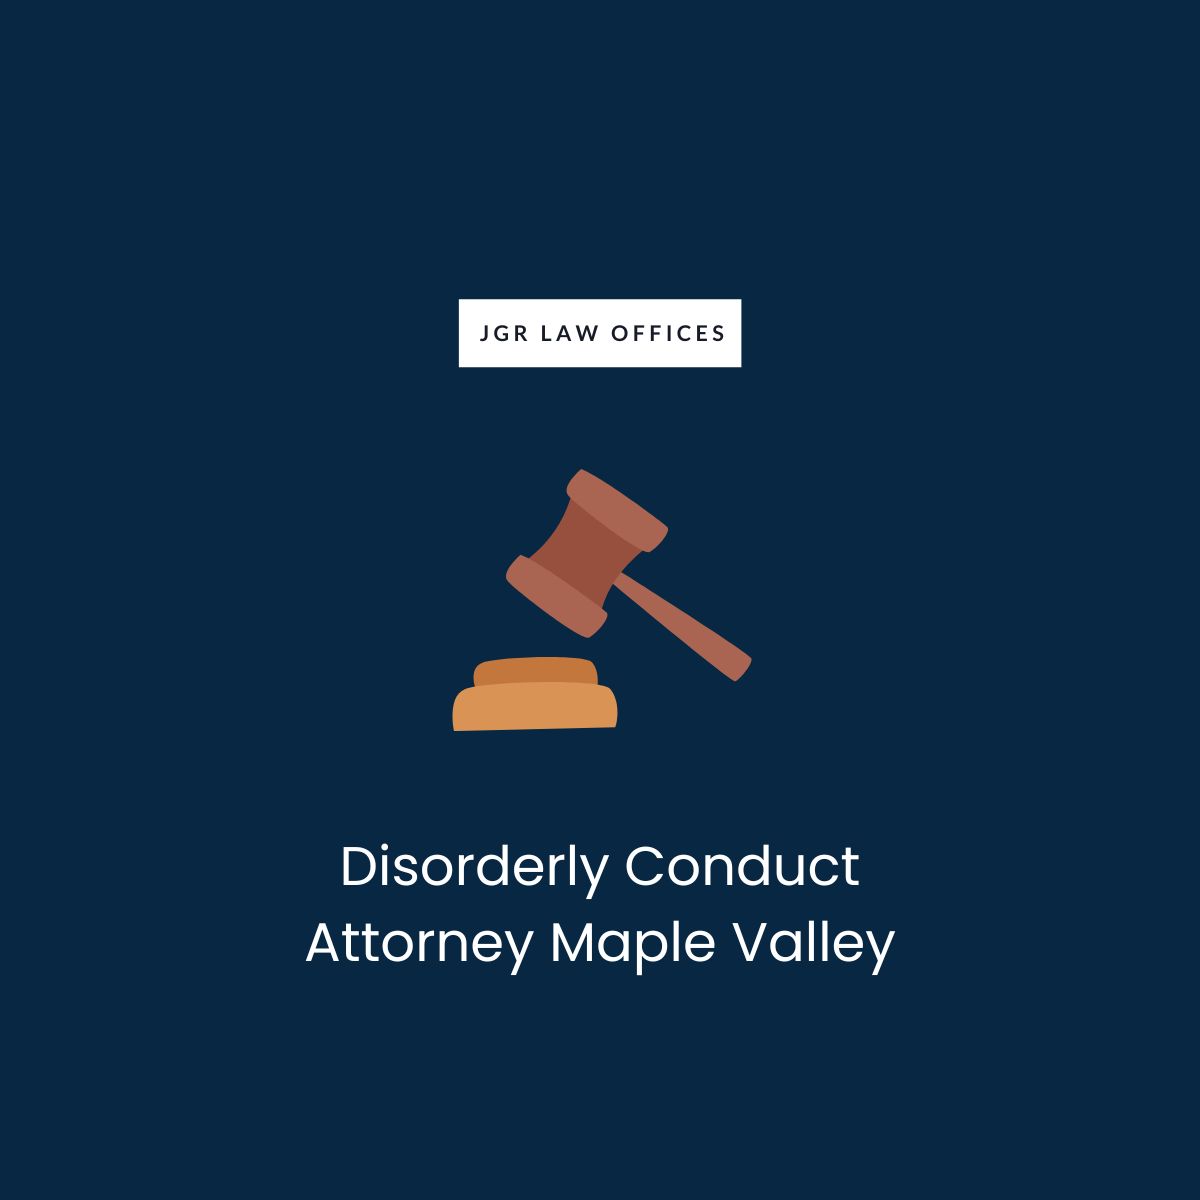 Disorderly Conduct Lawyer Maple Valley Disorderly Conduct Disorderly Conduct